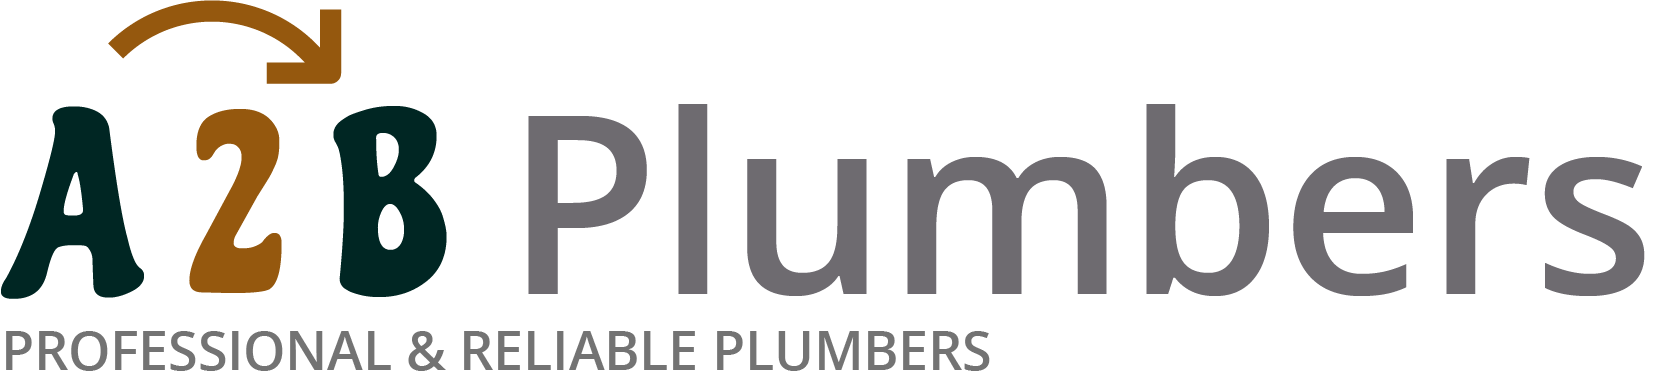 If you need a boiler installed, a radiator repaired or a leaking tap fixed, call us now - we provide services for properties in High Peak and the local area.